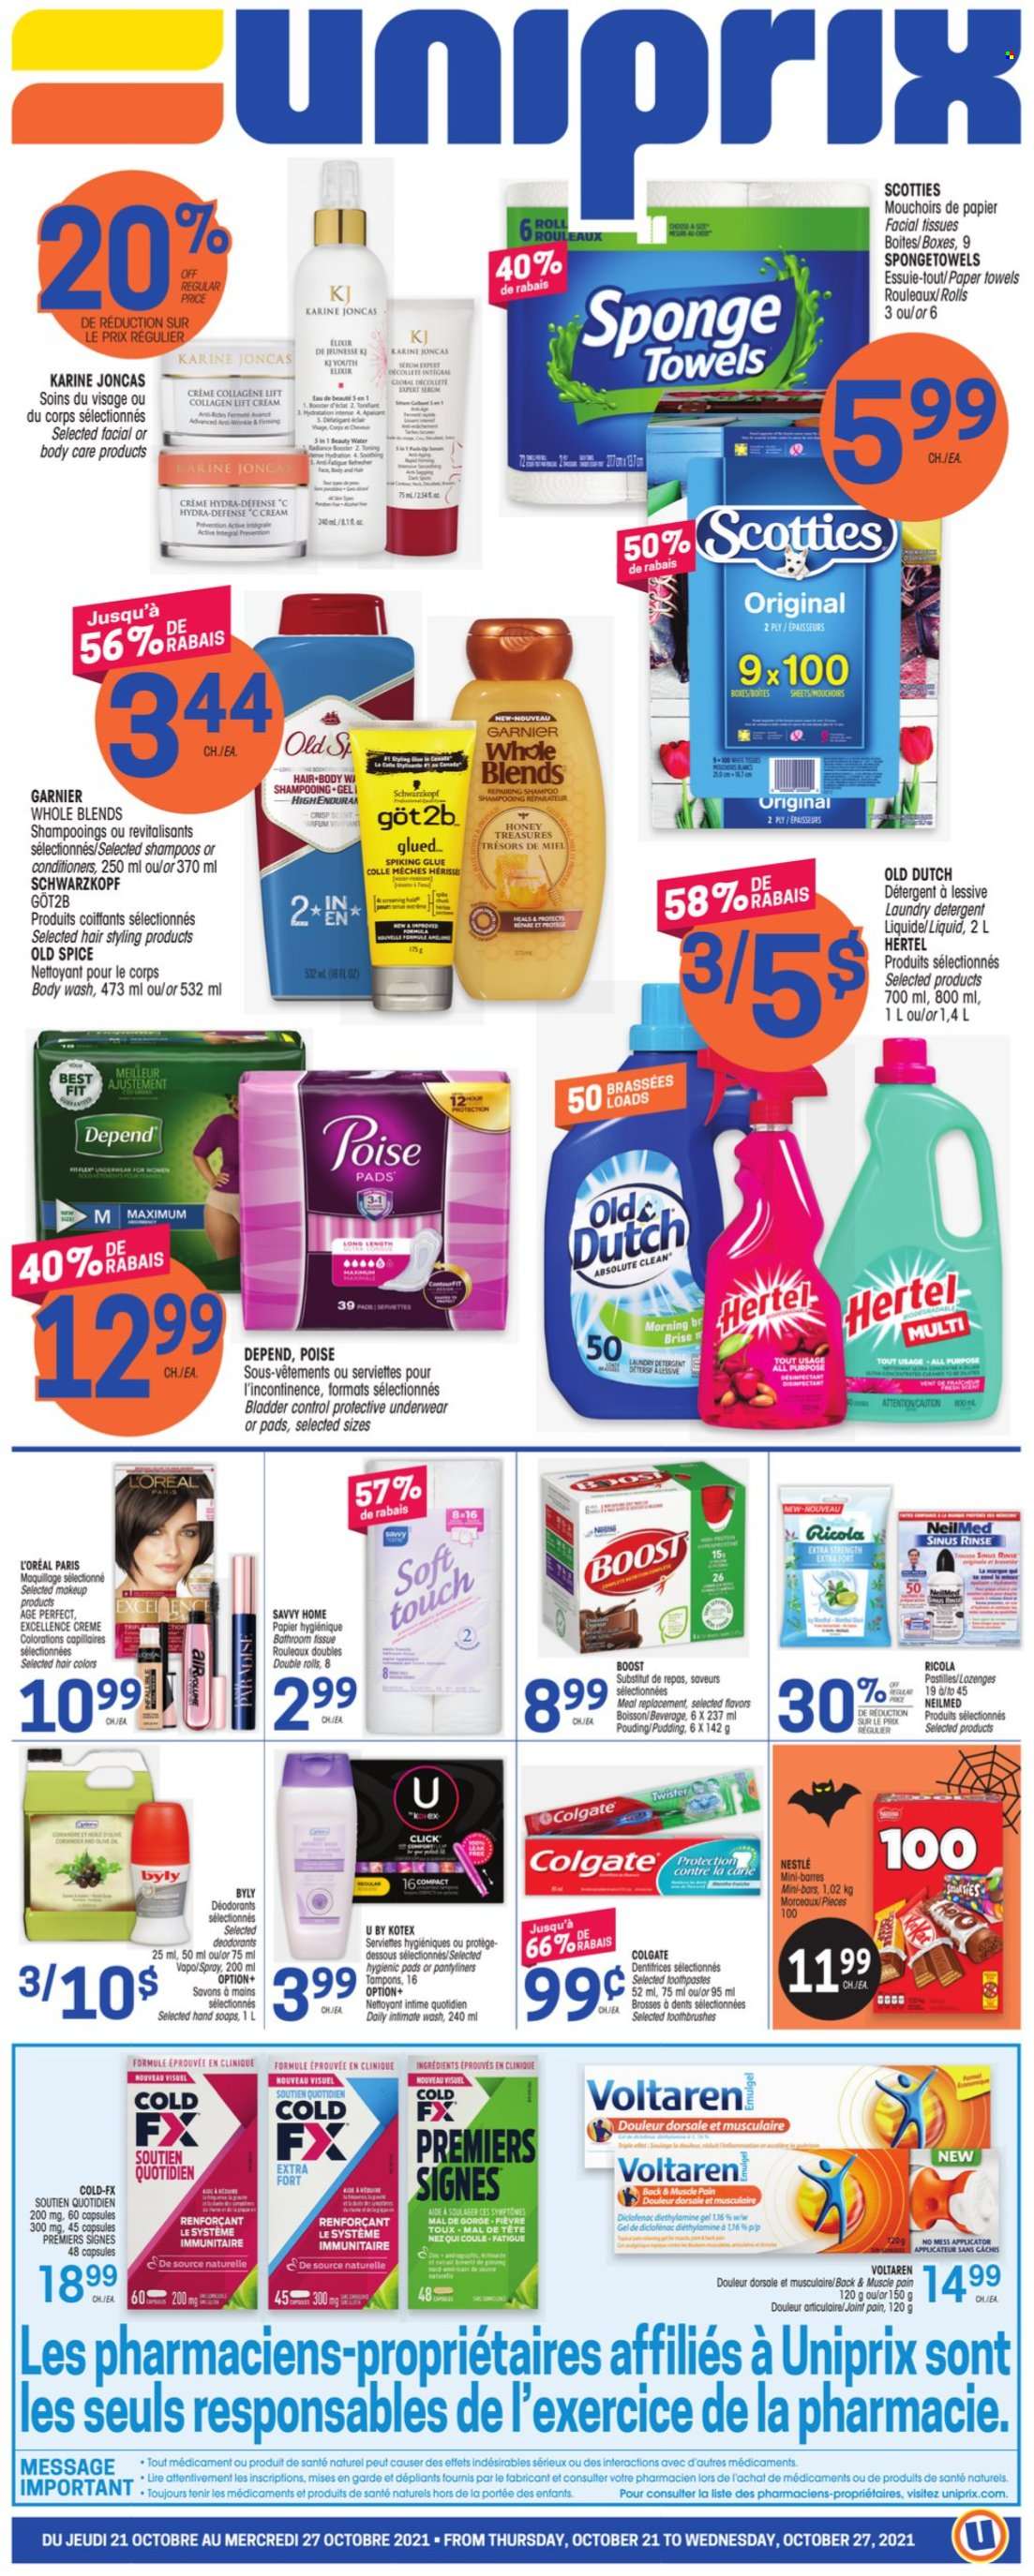 thumbnail - Uniprix Flyer - October 21, 2021 - October 27, 2021 - Sales products - Ricola, pudding, spice, honey, Boost, tissues, kitchen towels, paper towels, laundry detergent, body wash, Kotex, pantyliners, tampons, Clinique, facial tissues, L’Oréal, Absolute, makeup, Nestlé, detergent, Colgate, Garnier, shampoo, Old Spice, Schwarzkopf, Twister, deodorant. Page 1.